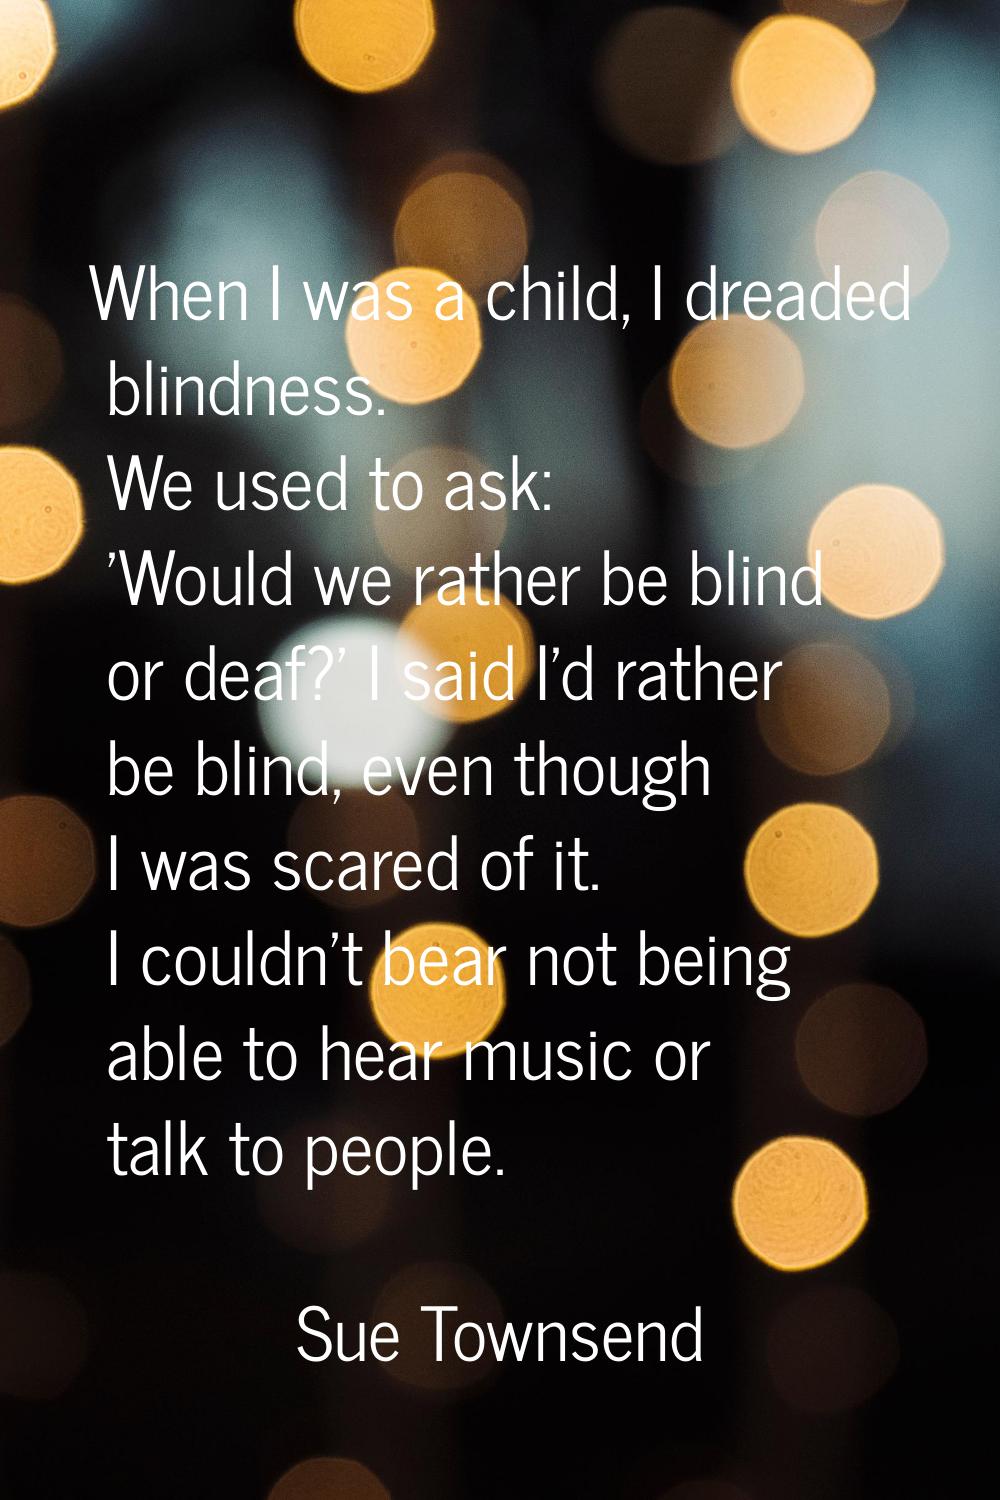 When I was a child, I dreaded blindness. We used to ask: 'Would we rather be blind or deaf?' I said